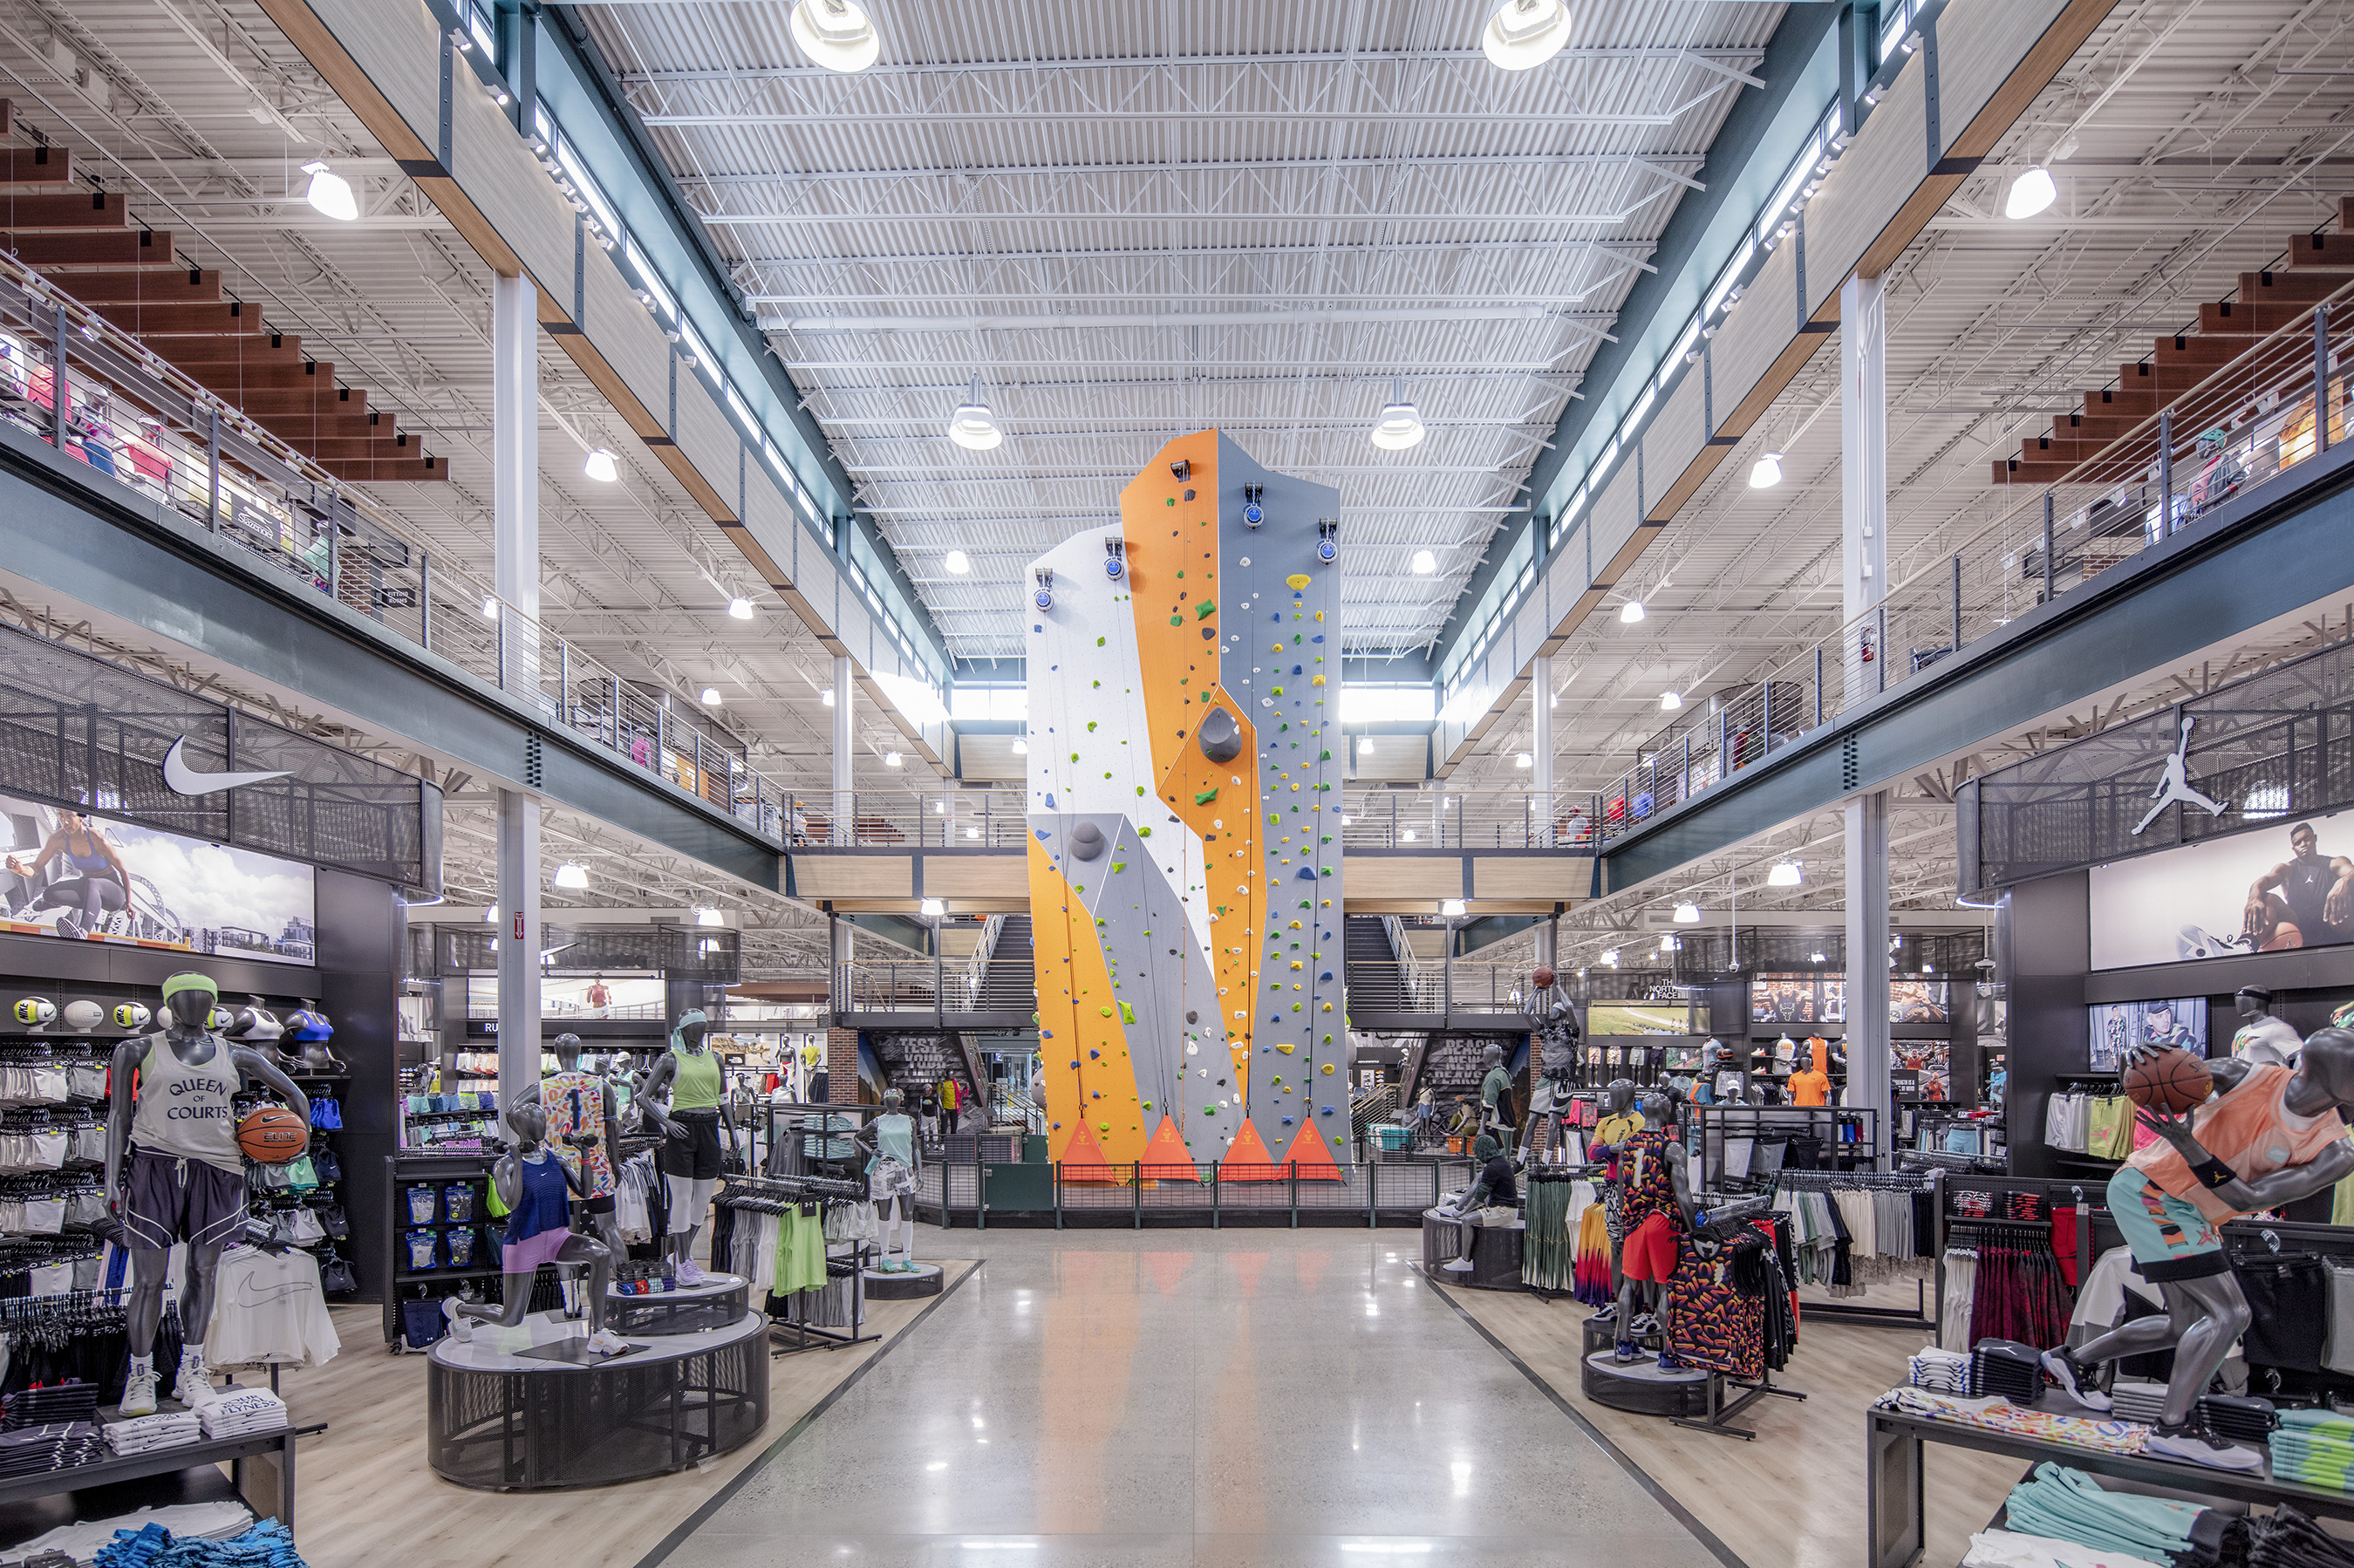 Dicks Sporting Goods Announces Grand Opening Of Seven Stores - Including Its Second Dicks House Of Sport - In June